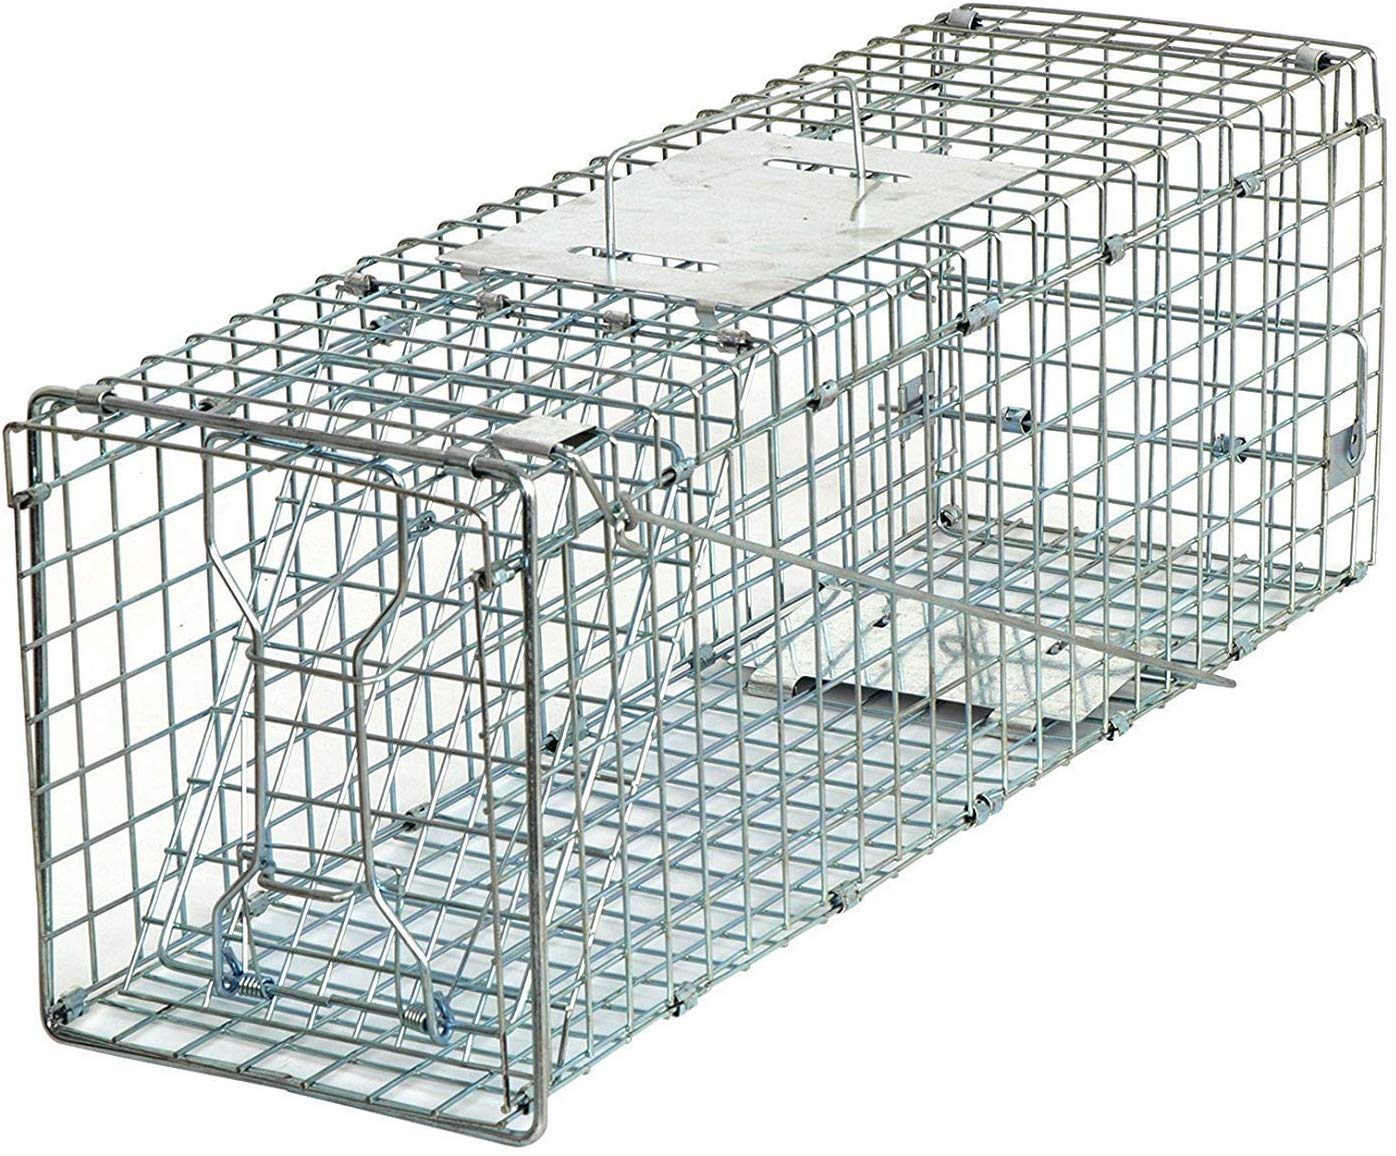 HomGarden Catch Release Humane Live Animal Trap Cage for Rabbit, Groundhog,  Squirrel, Raccoon, Mole, Gopher, Chicken, 24inch 24 inches